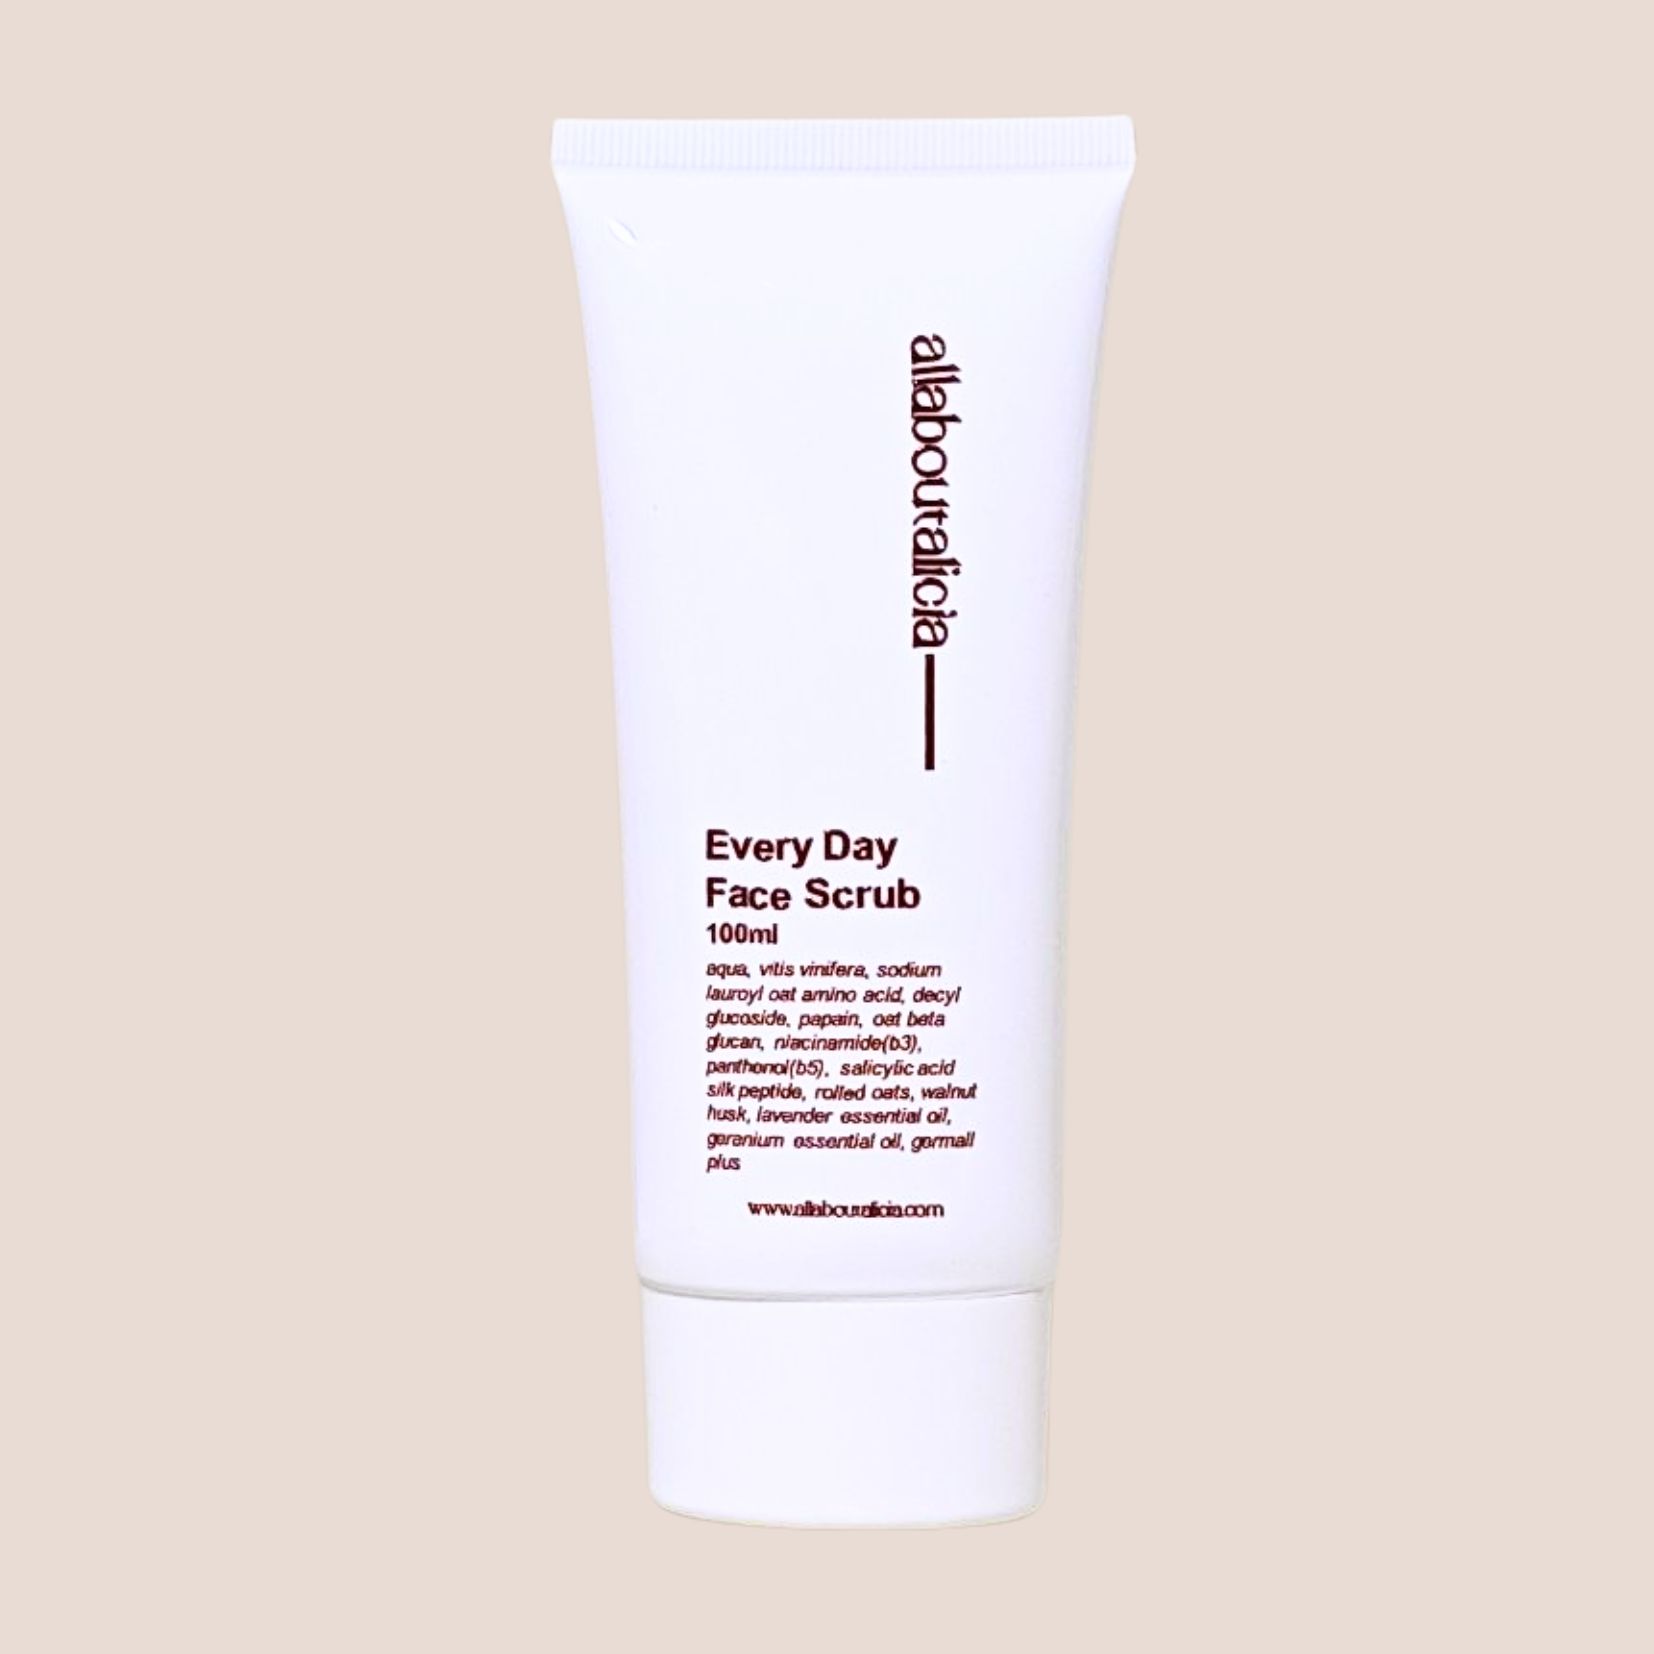 Every Day Face Scrub